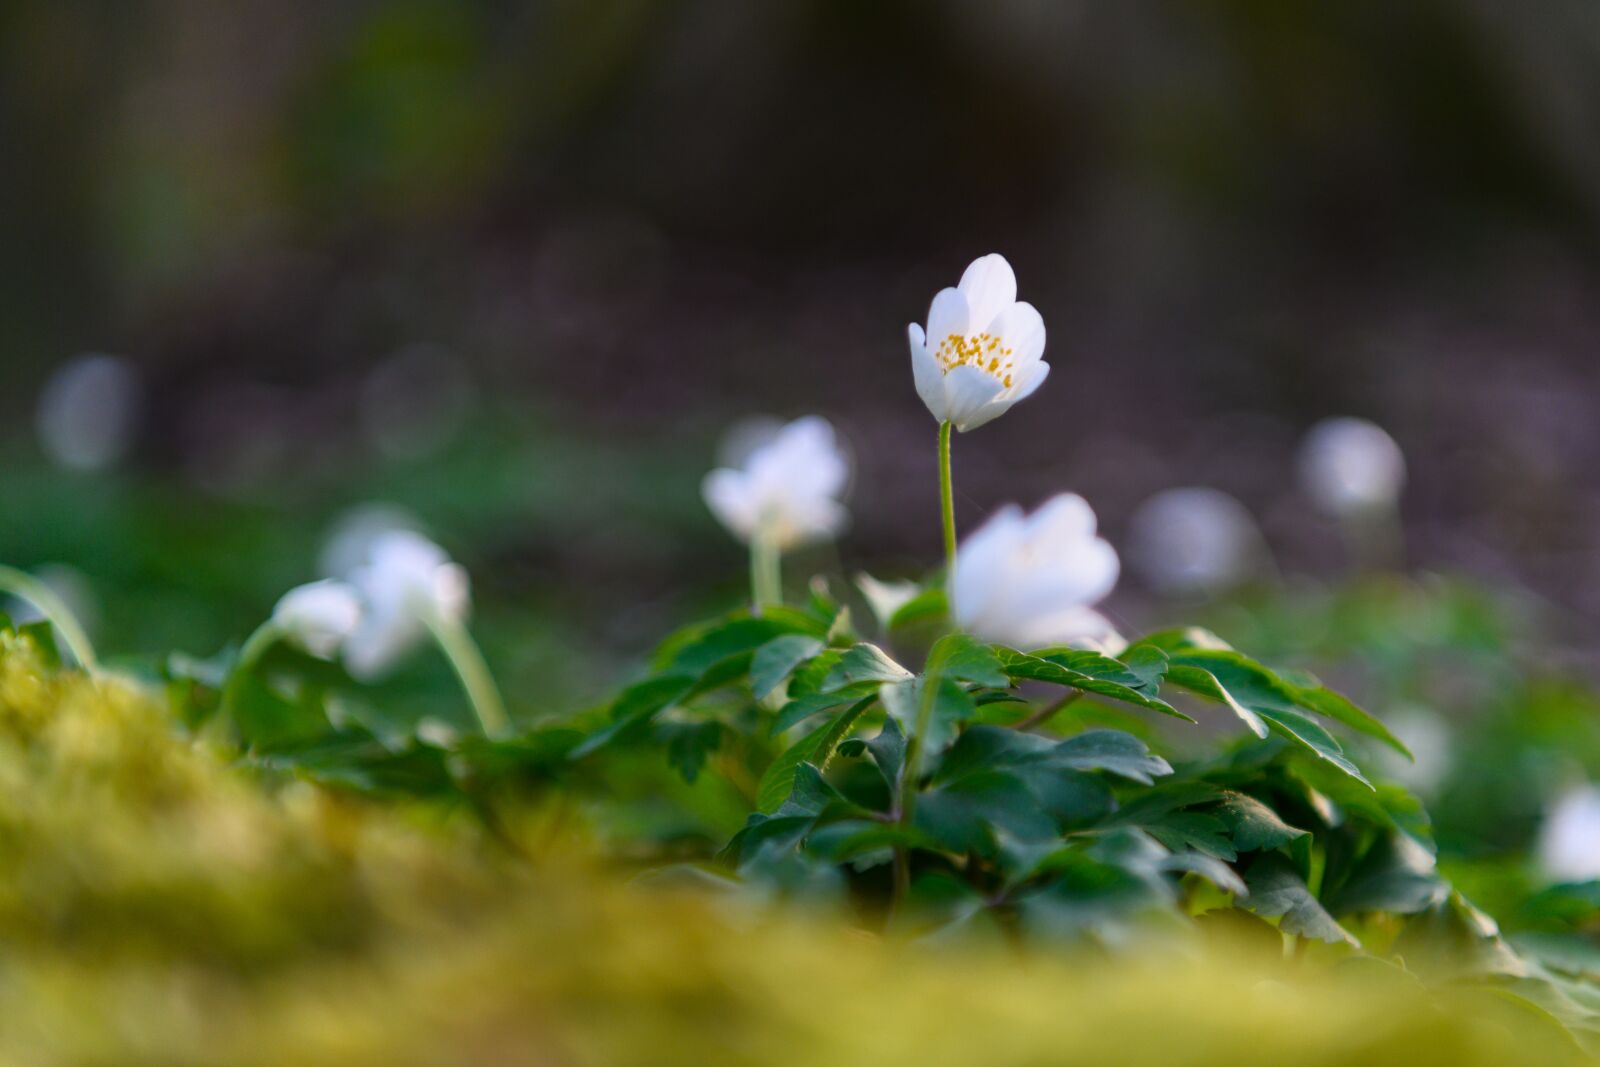 Nikon Z7 sample photo. Wood anemone, forest, spring photography